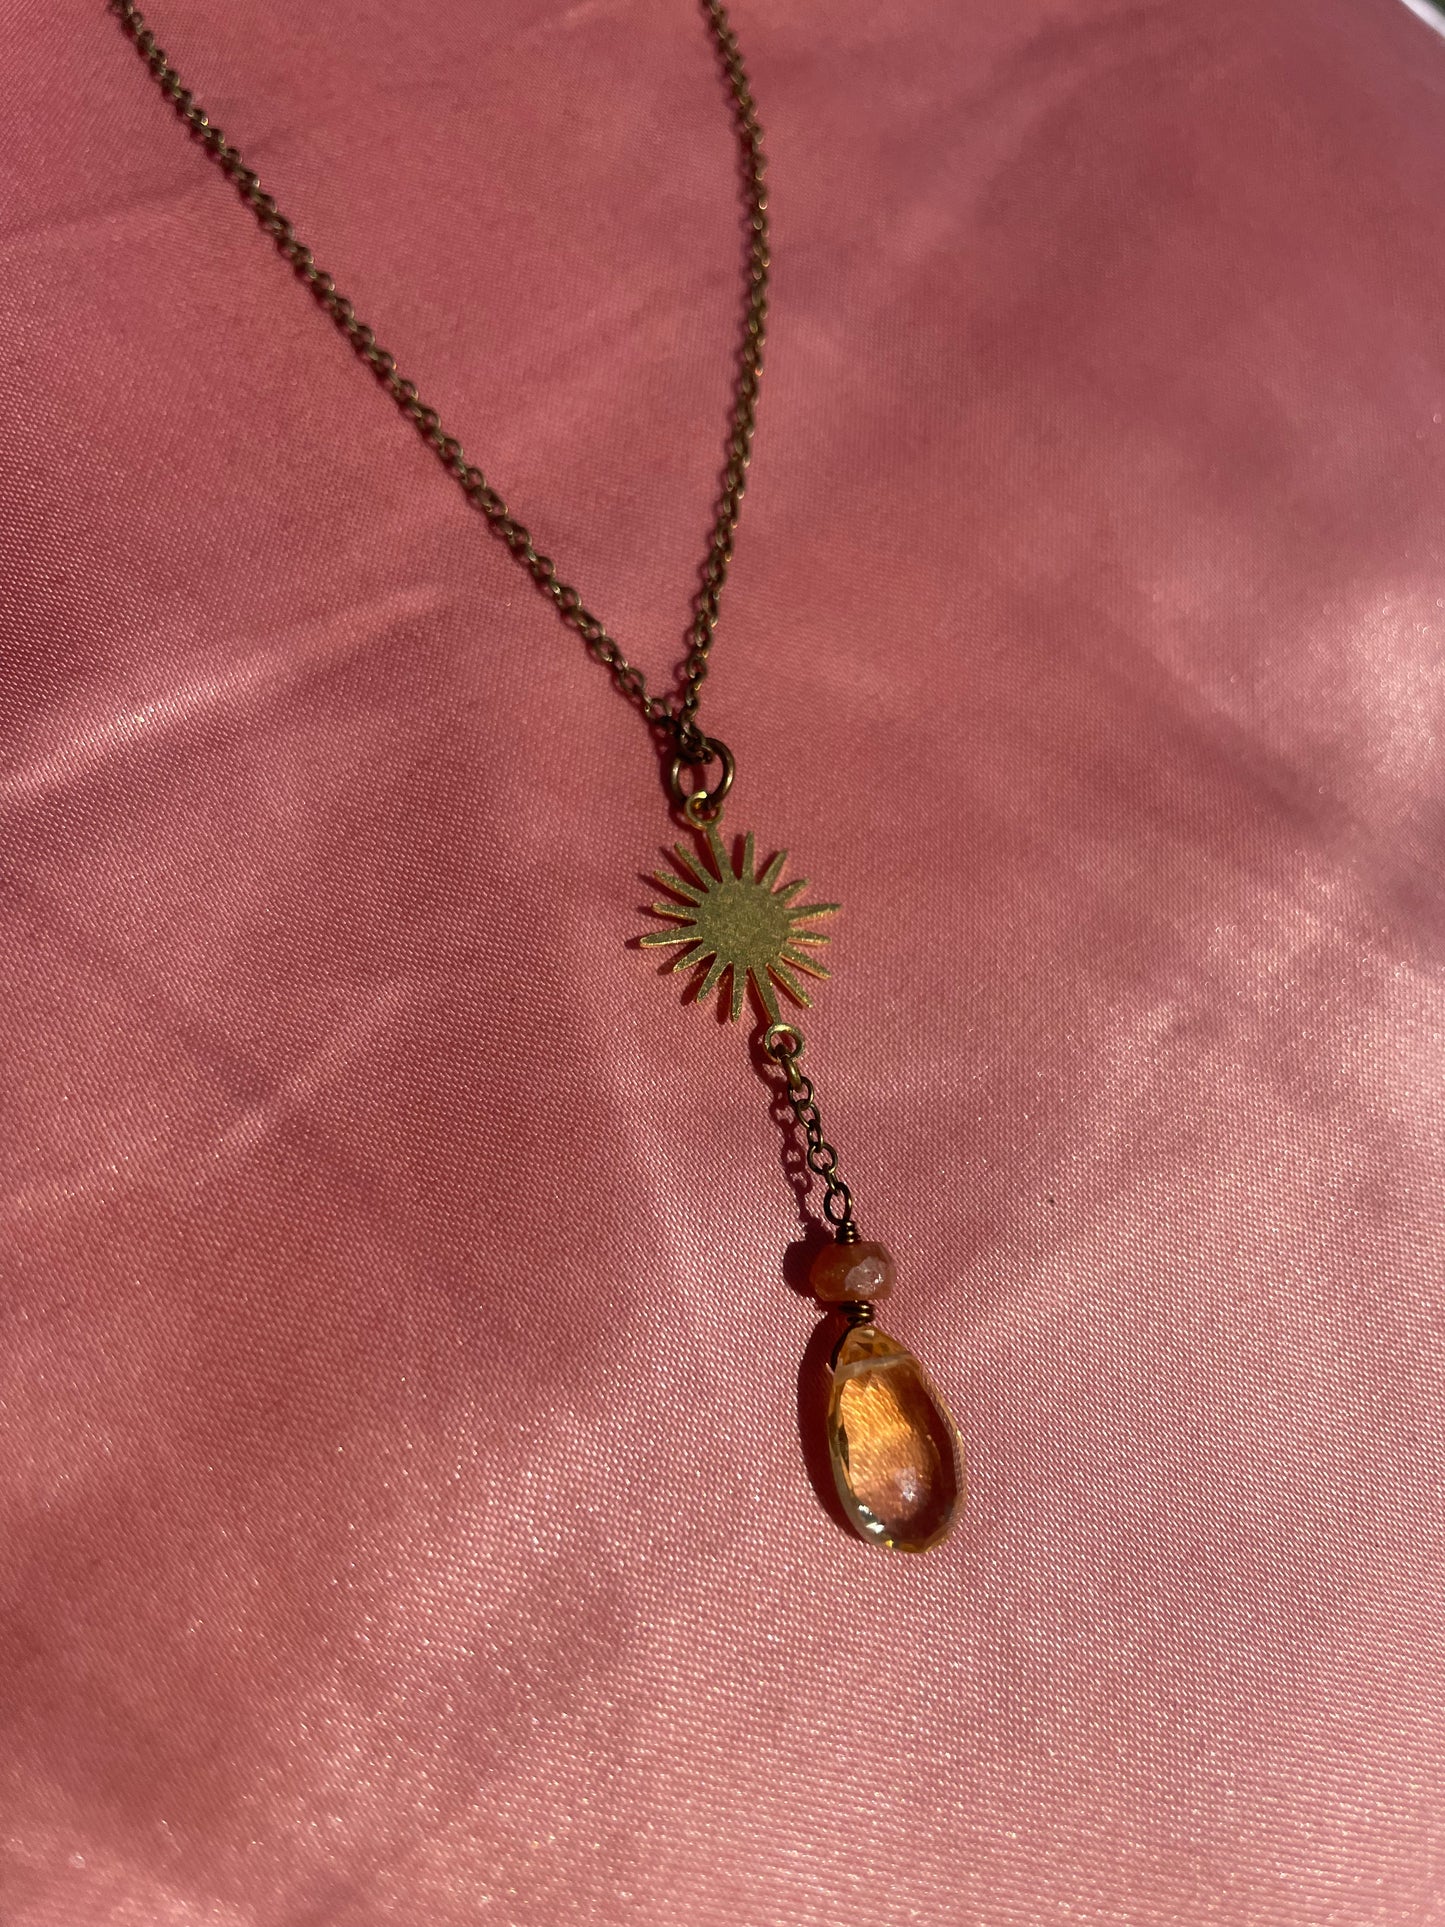 Citrine and Sunstone Long Chain Necklace